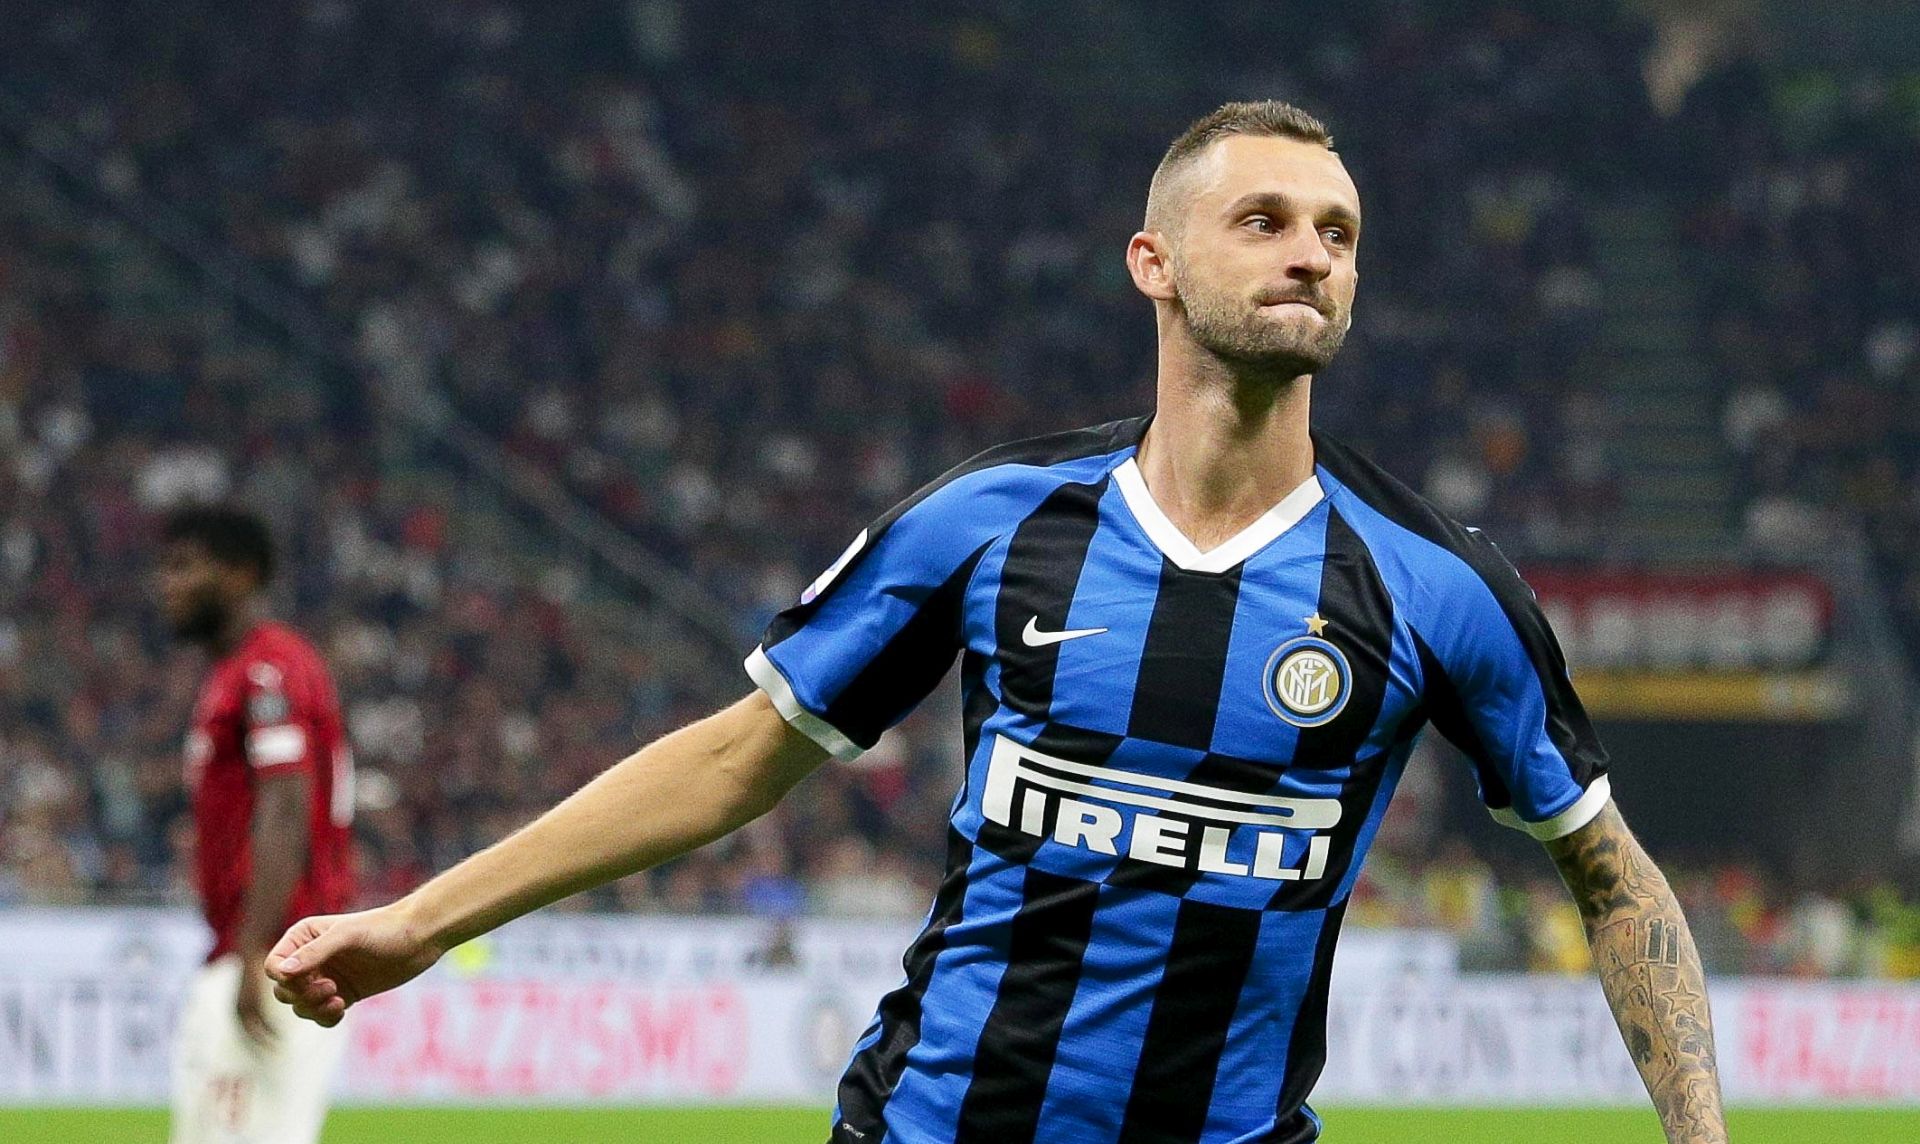 epa07860109 Inter's Marcelo Brozovic celebrates after scoring the 1-0 lead during the Italian Serie A soccer match between AC Milan and Inter Milan at Giuseppe Meazza stadium in Milan, Italy, 21 September 2019.  EPA/ROBERTO BREGANI